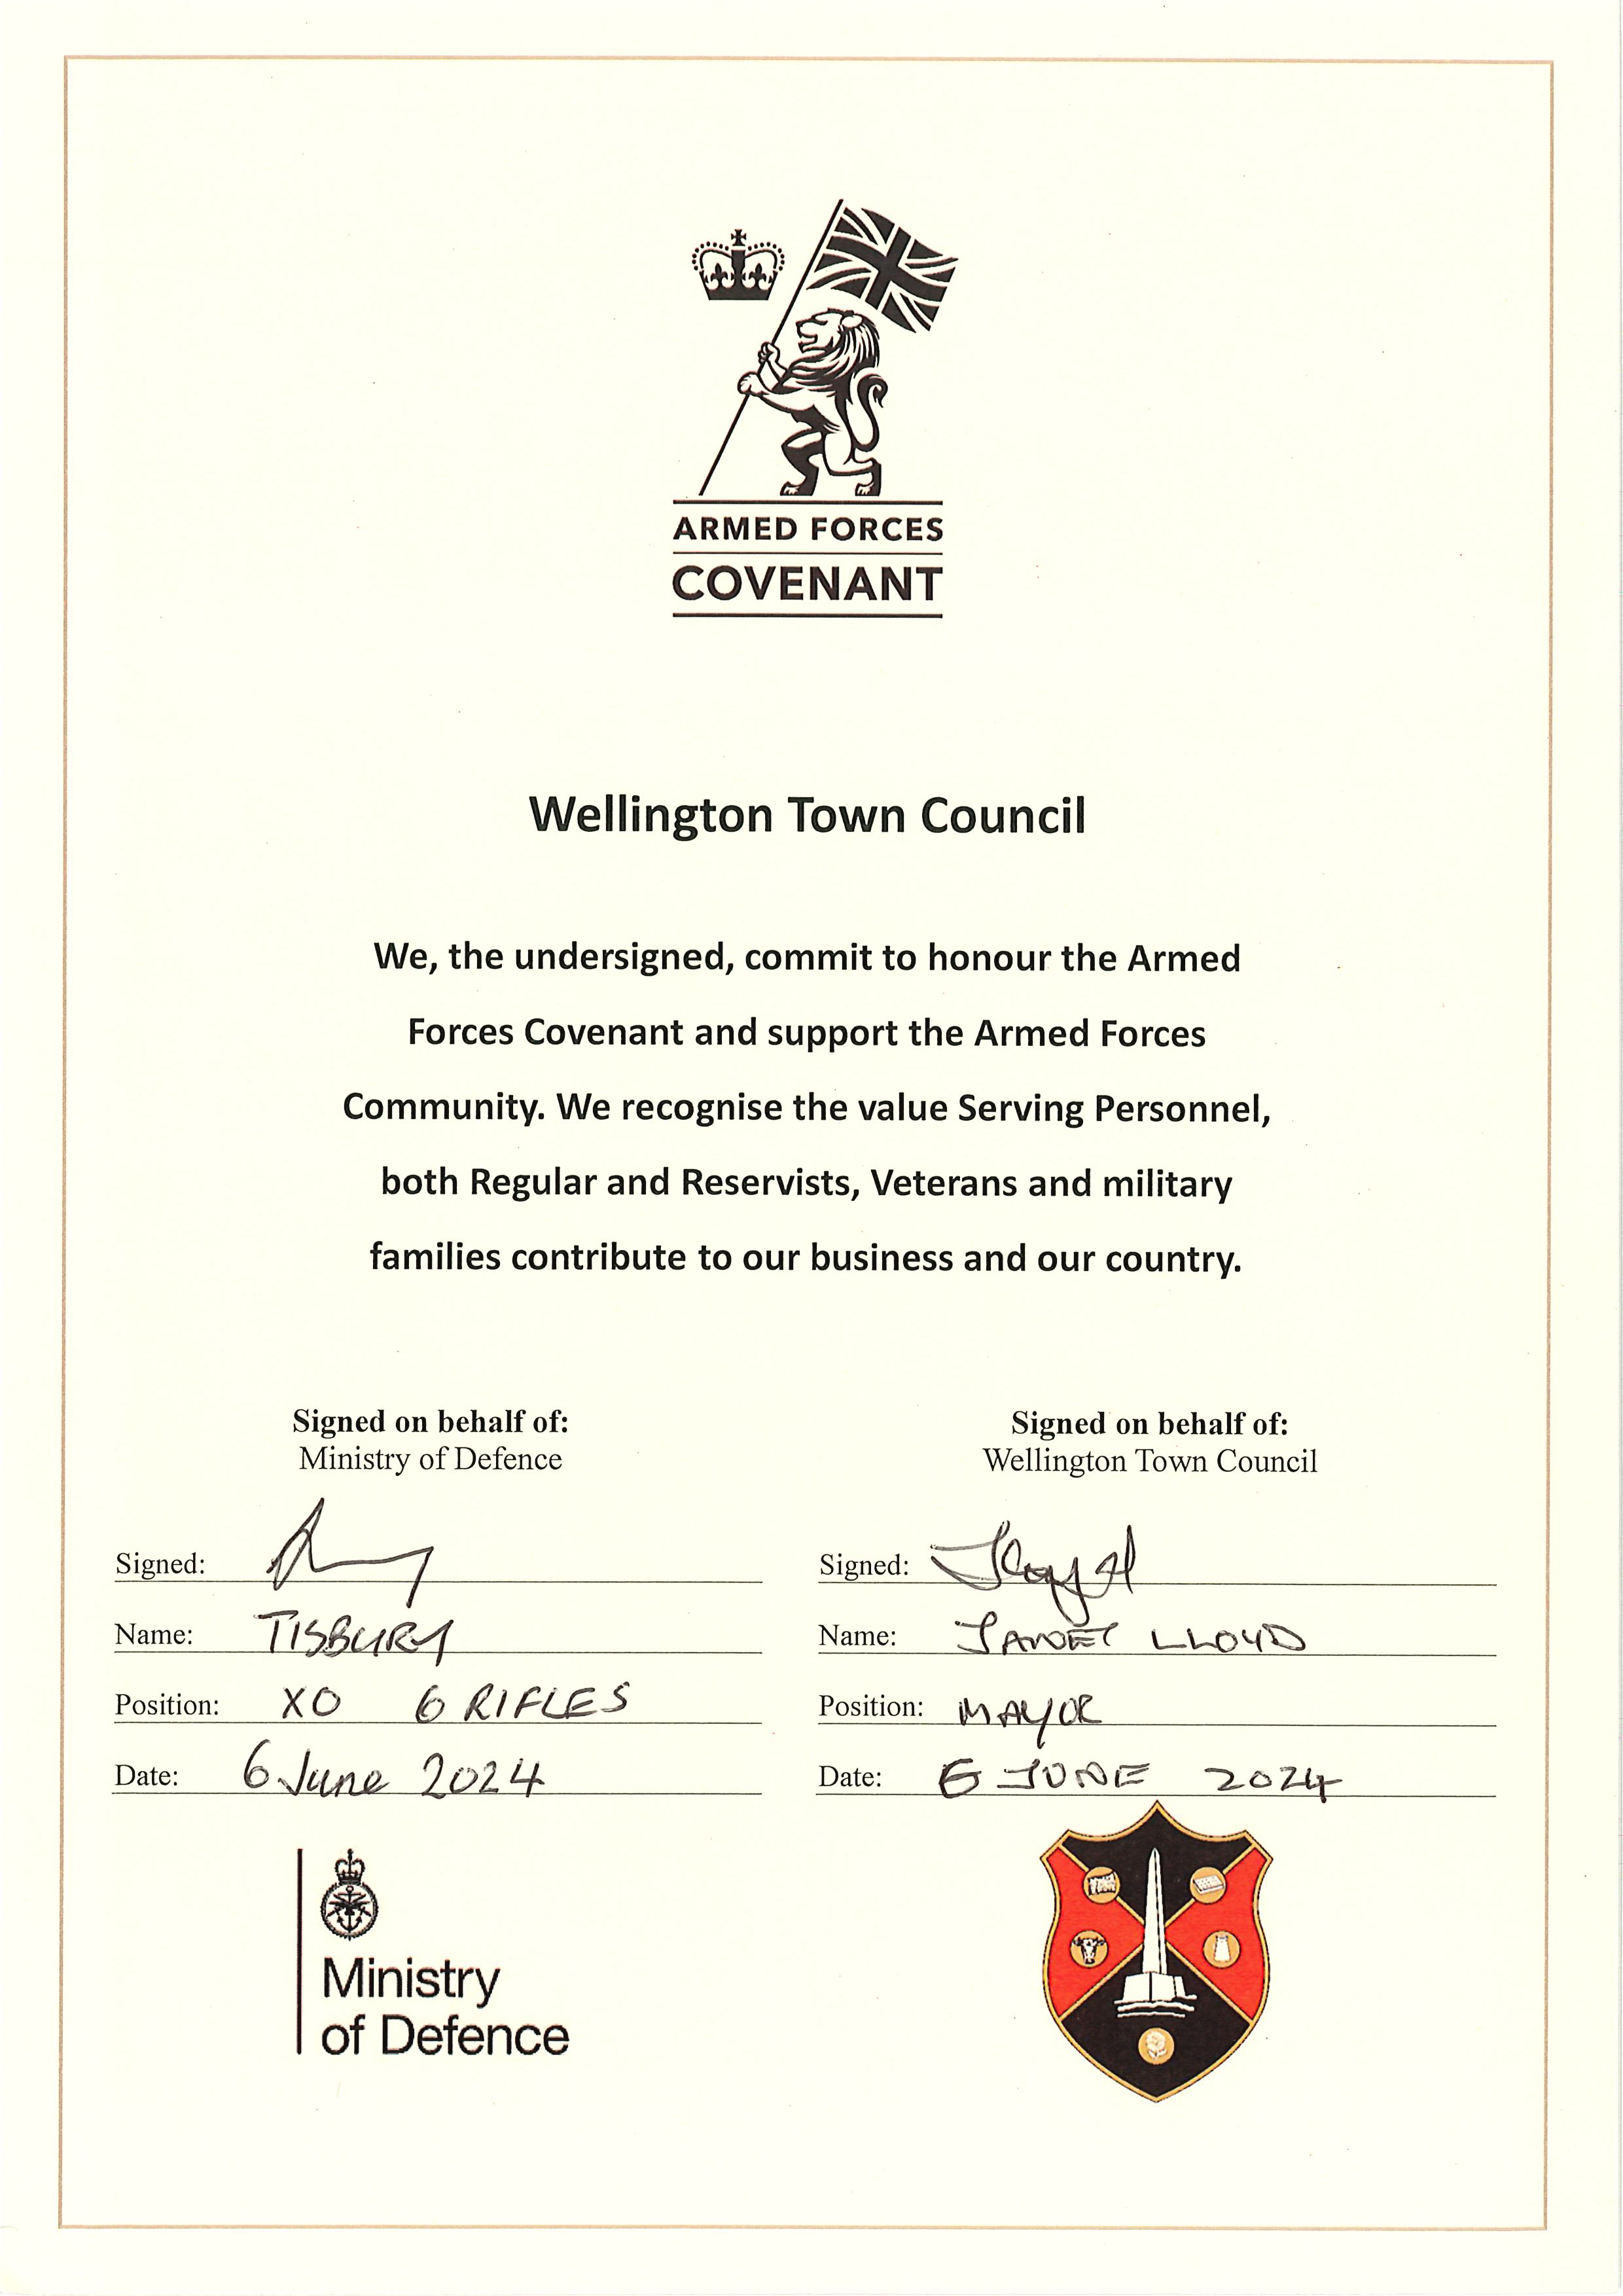 Armed Forces Covenant. Wellington Town Council. We, the undersigned, commit to honour the Armed Forces Covenant and support the Armed Forces Community. We recognise the value Serving Personnel, both Regular and Reservists, Veterans and military families contribute to our business and our country. Signed by Major Tisbury and Mayor Lloyd on 6th June 2024.